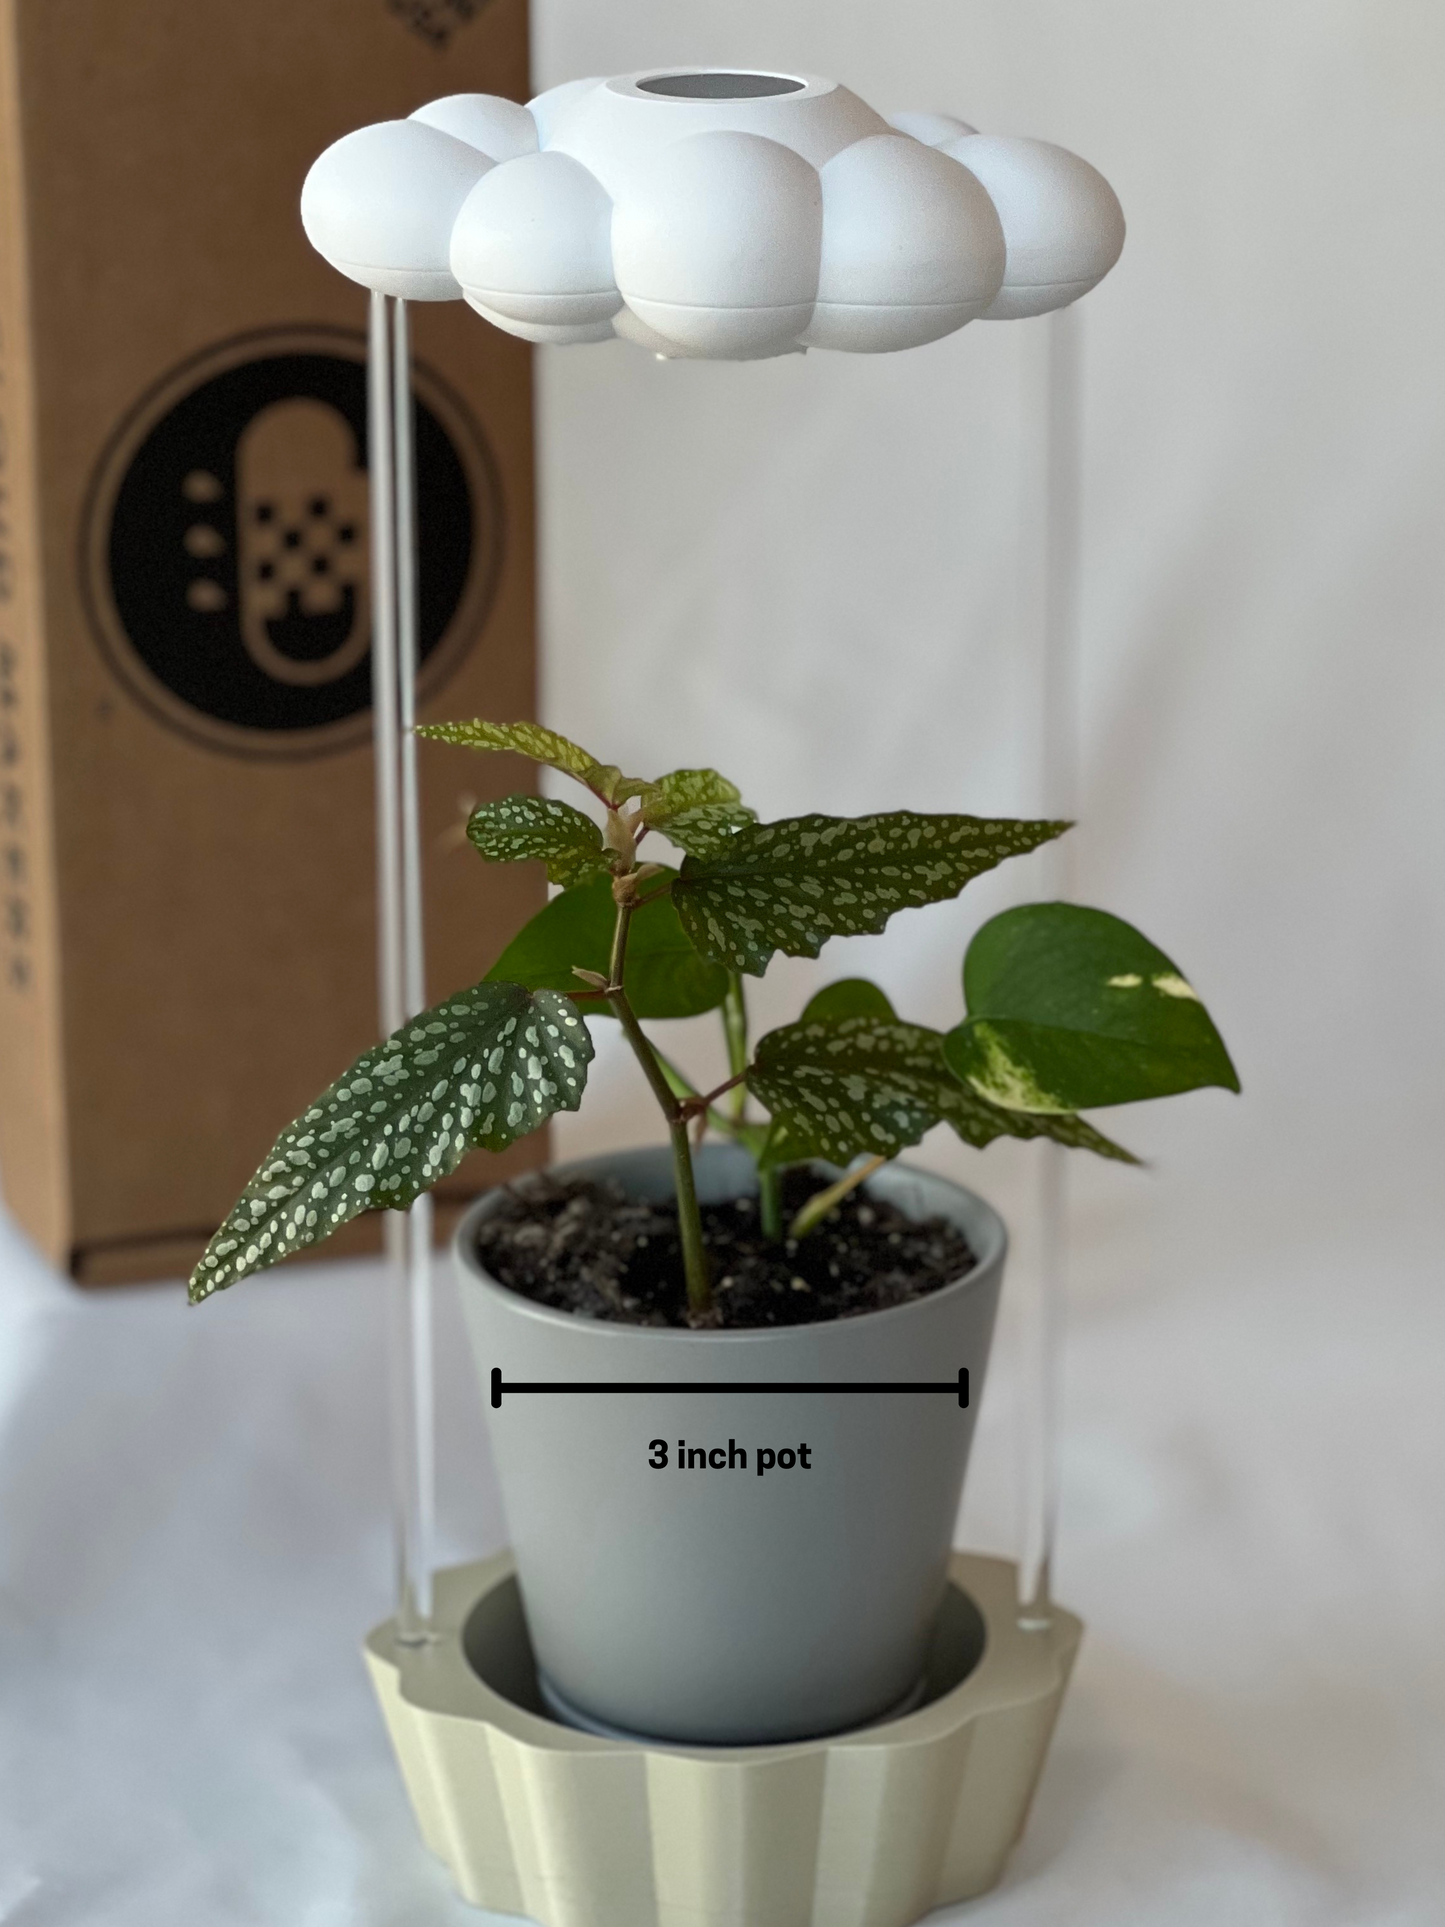 Original Dripping rain cloud by THE CLOUD MAKERS with Tan Stand